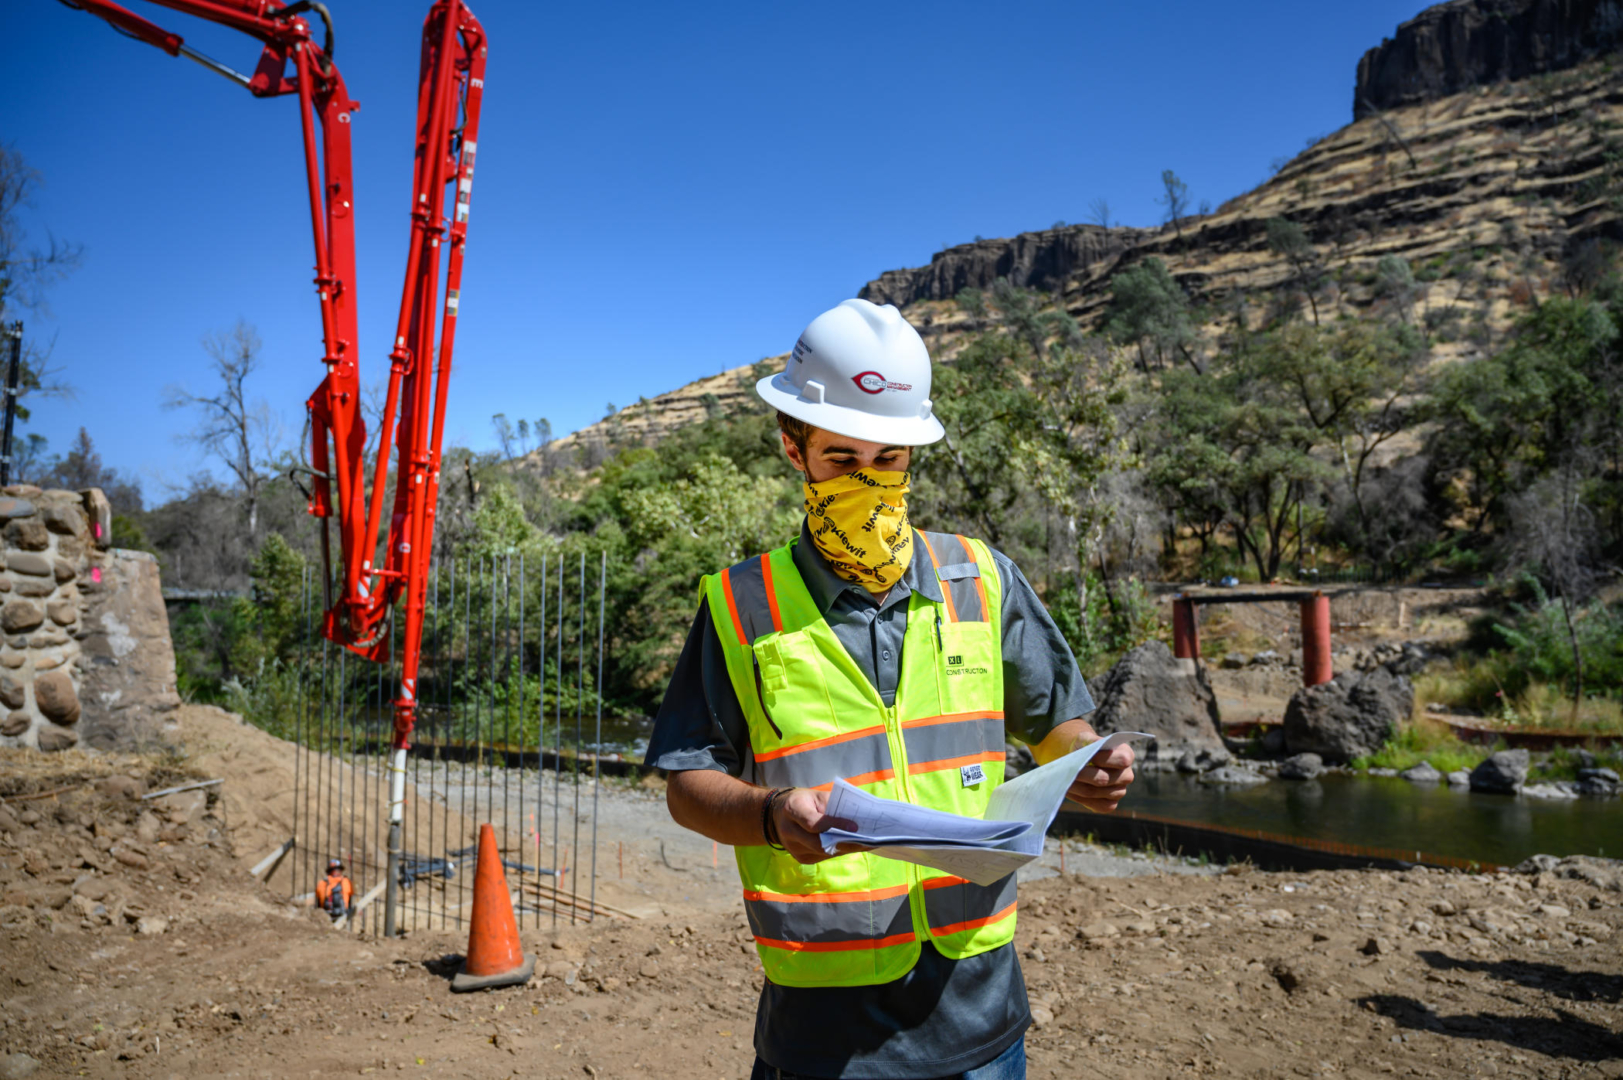 A student in a hard hat looks at engineering plans as heavy equipment is used in a bridge rebuild in a canyon behind him.